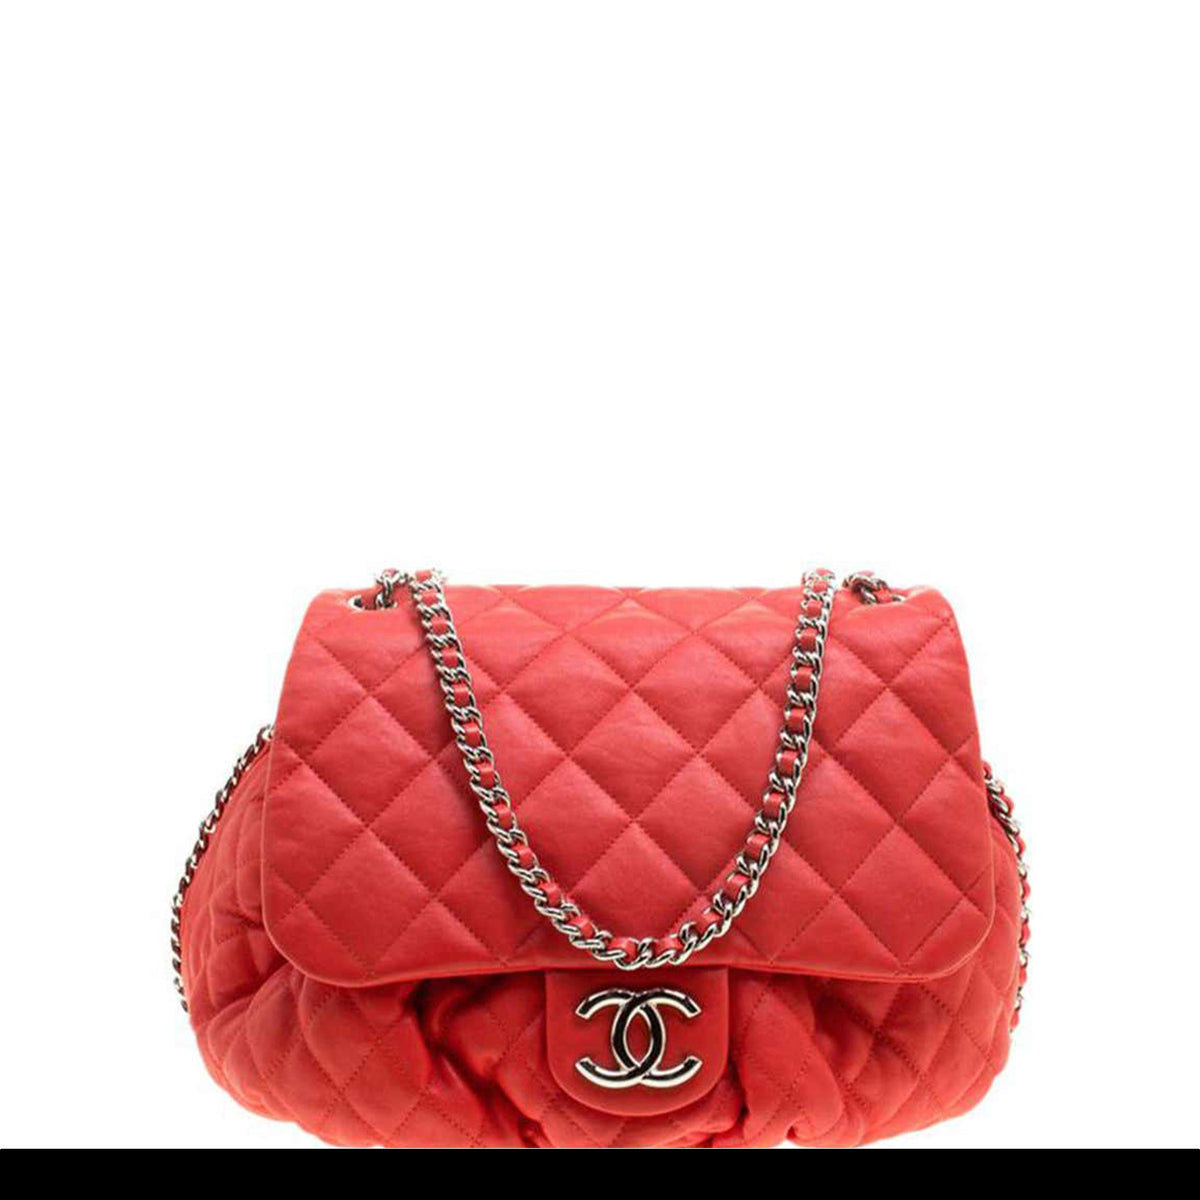 Chanel Large Chain Around Limited Edition Pristine Red Calfskin Leathe ...